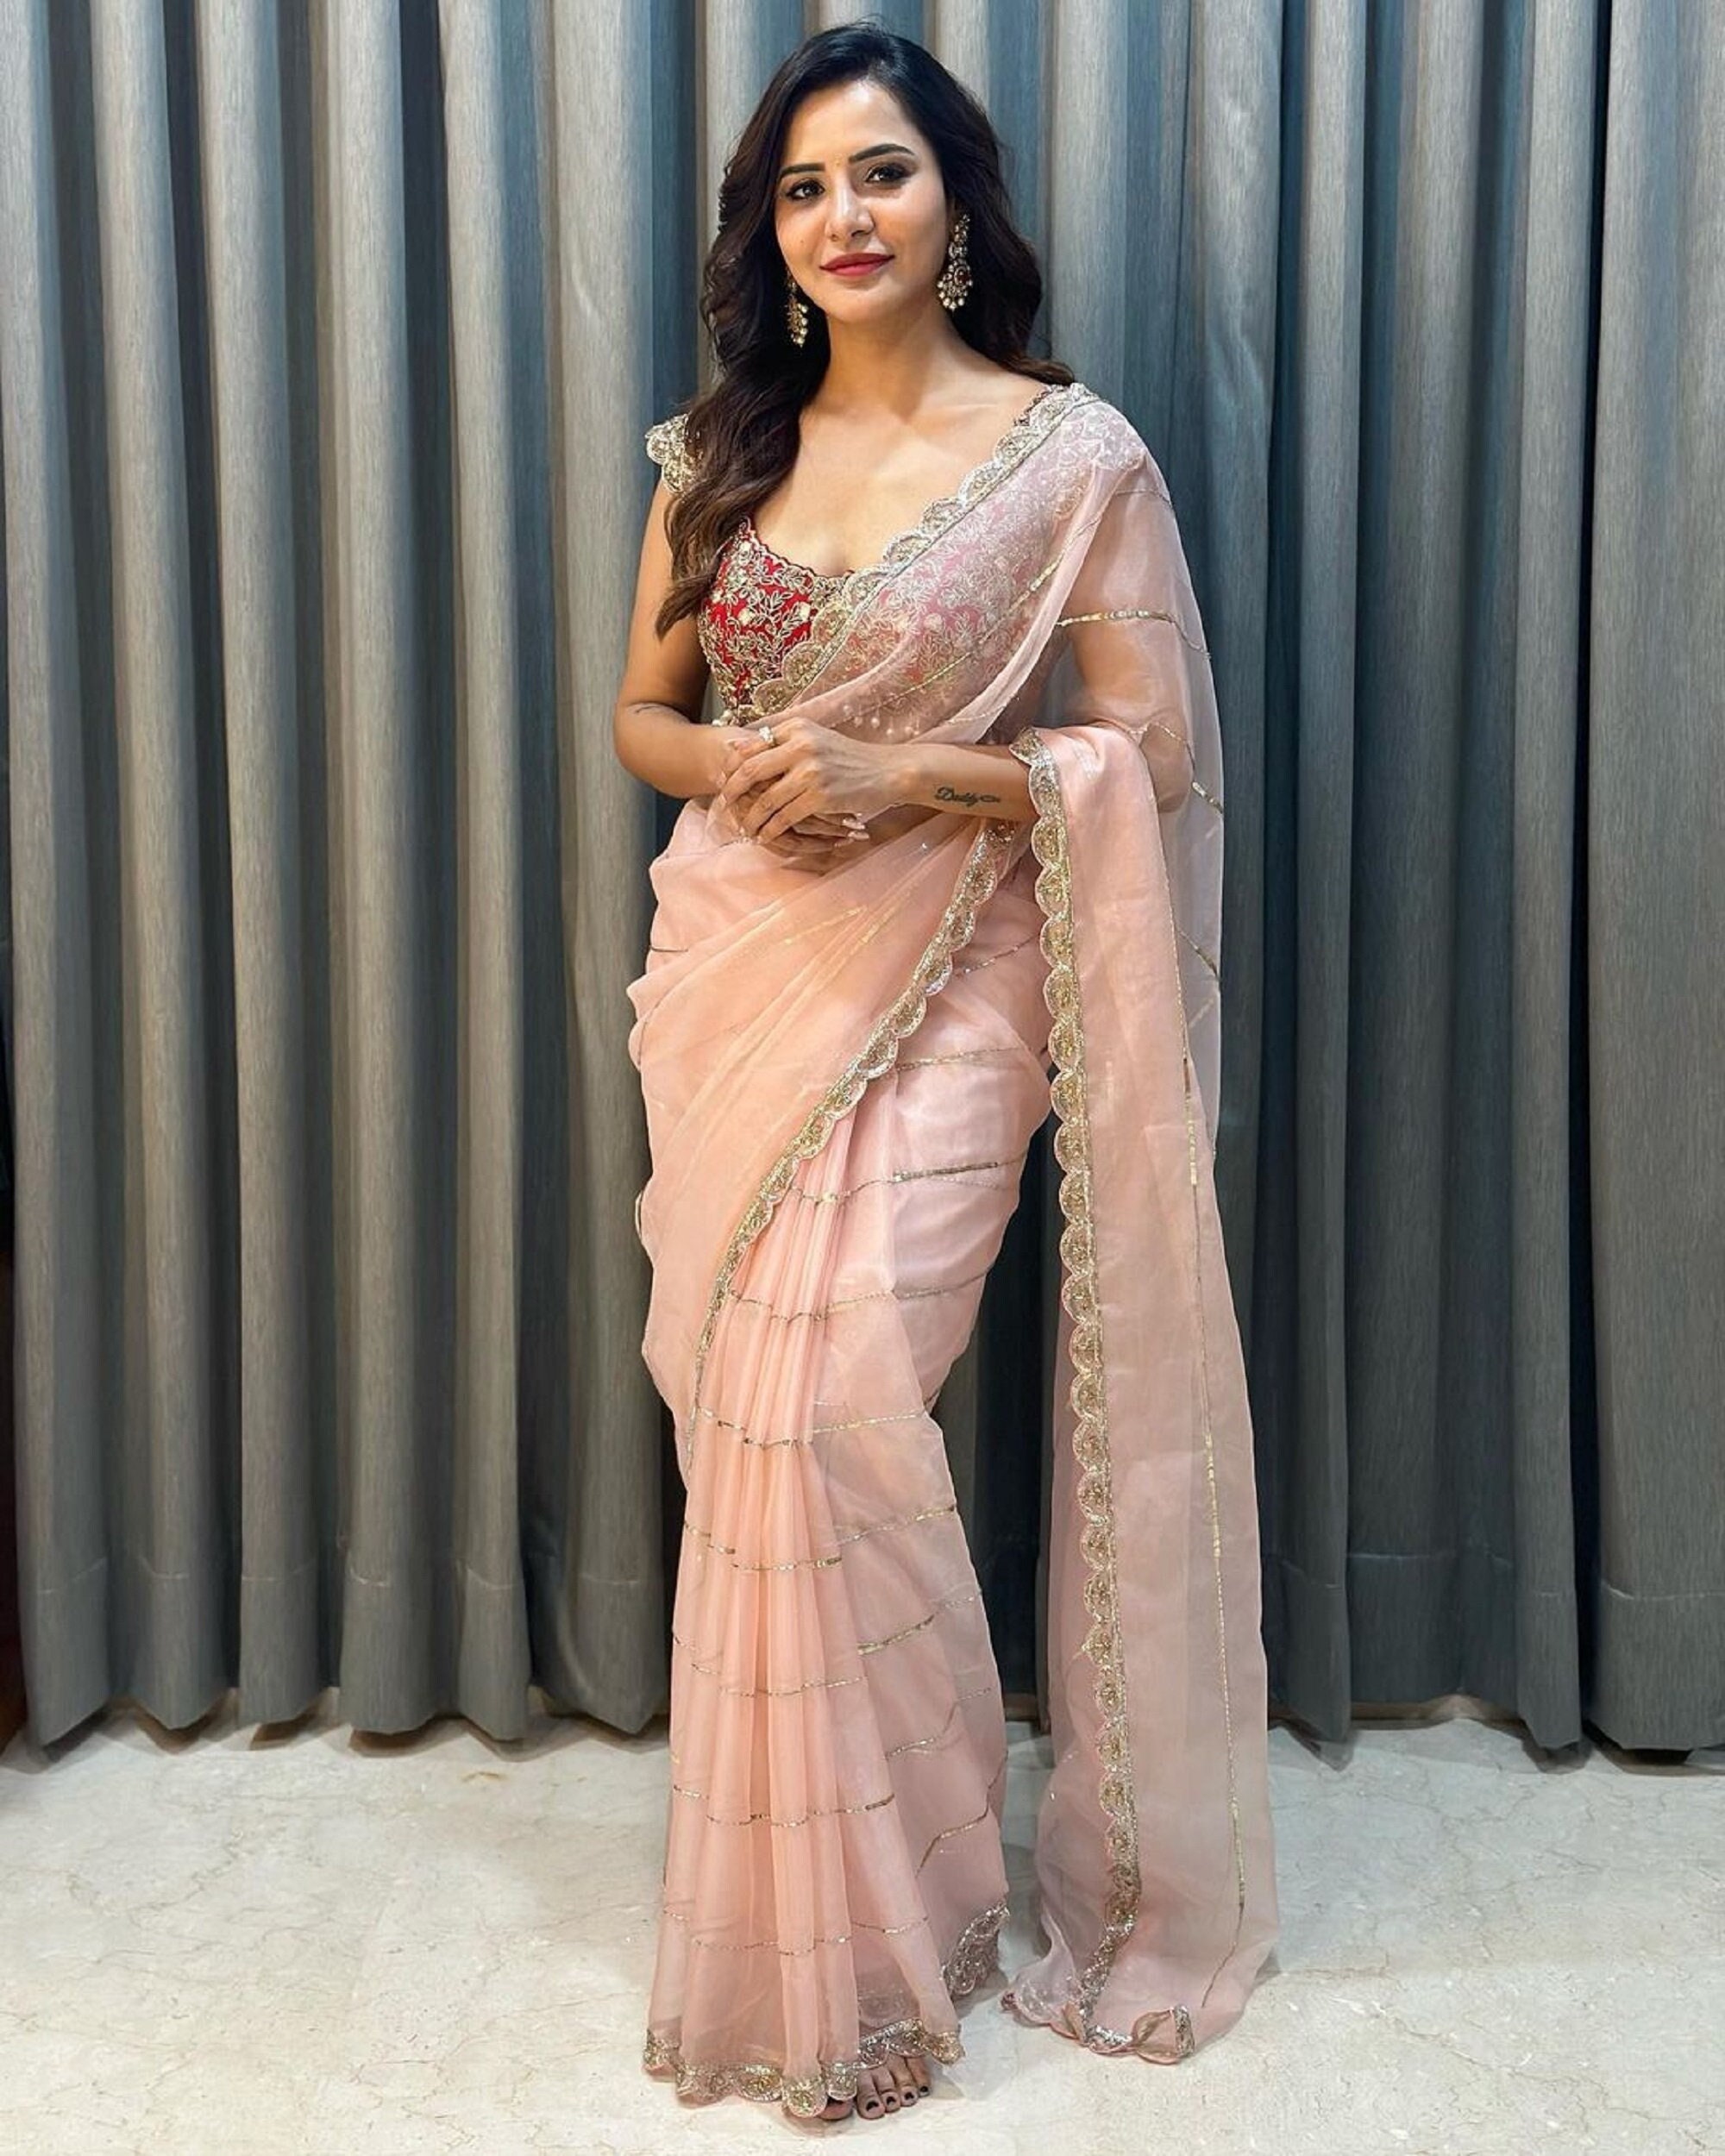 Saree Look For Wedding Party for Girl in Pink Colour